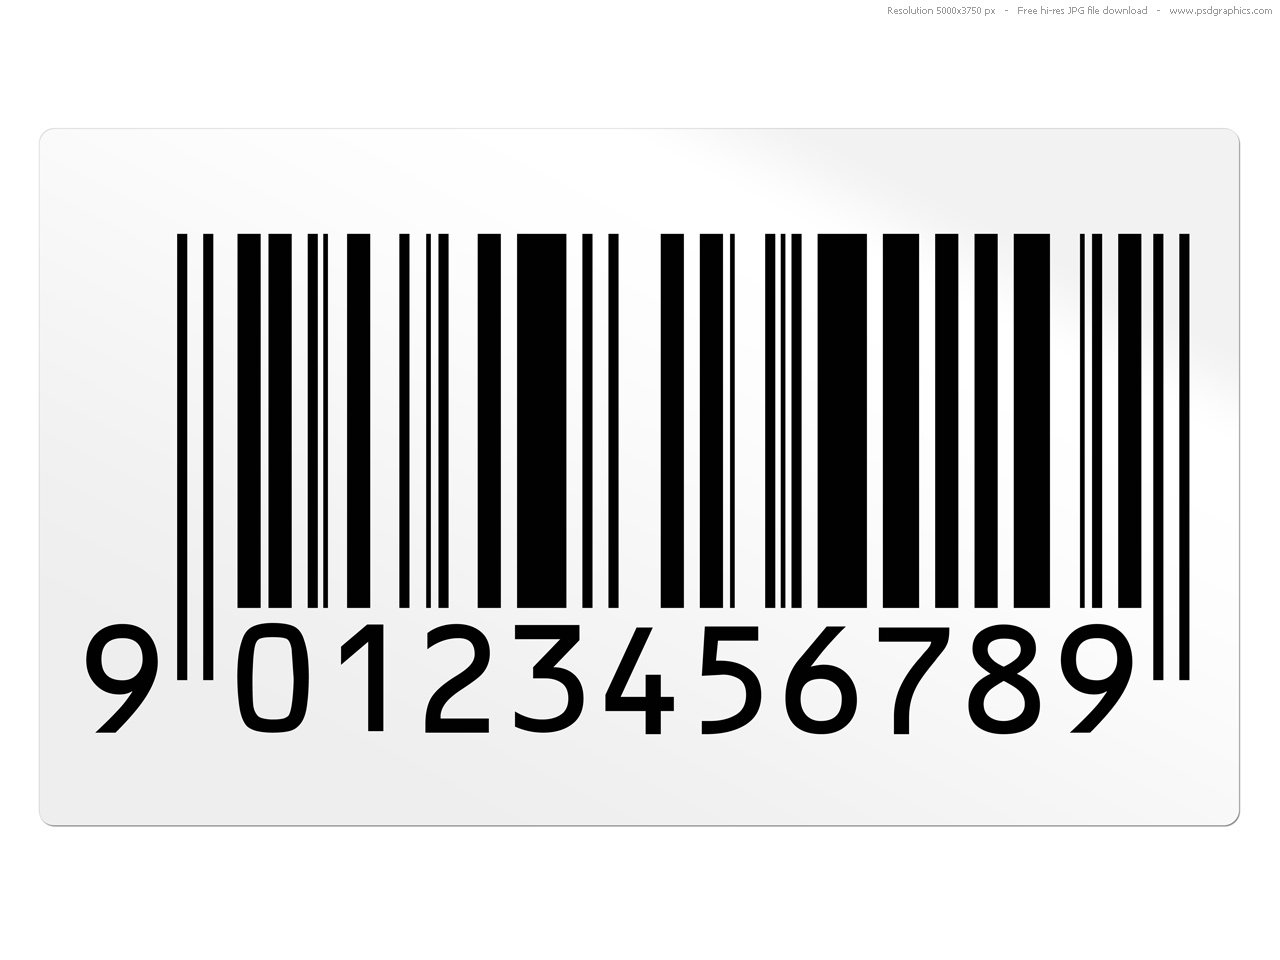 barcode clipart - photo #24